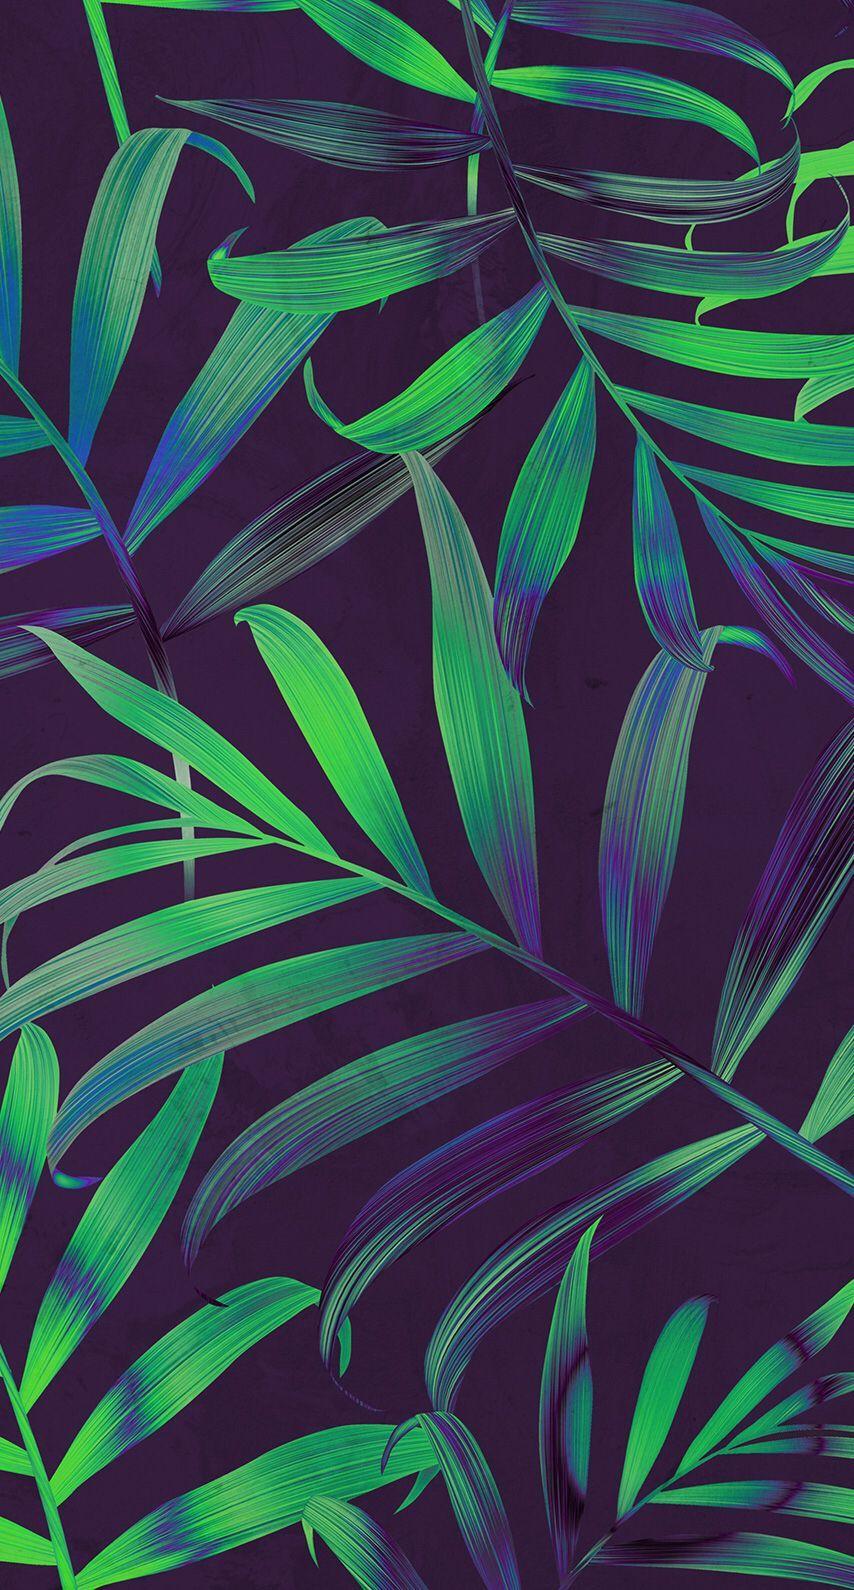 Aesthetic Palm Leaves Wallpapers - Top Free Aesthetic Palm Leaves